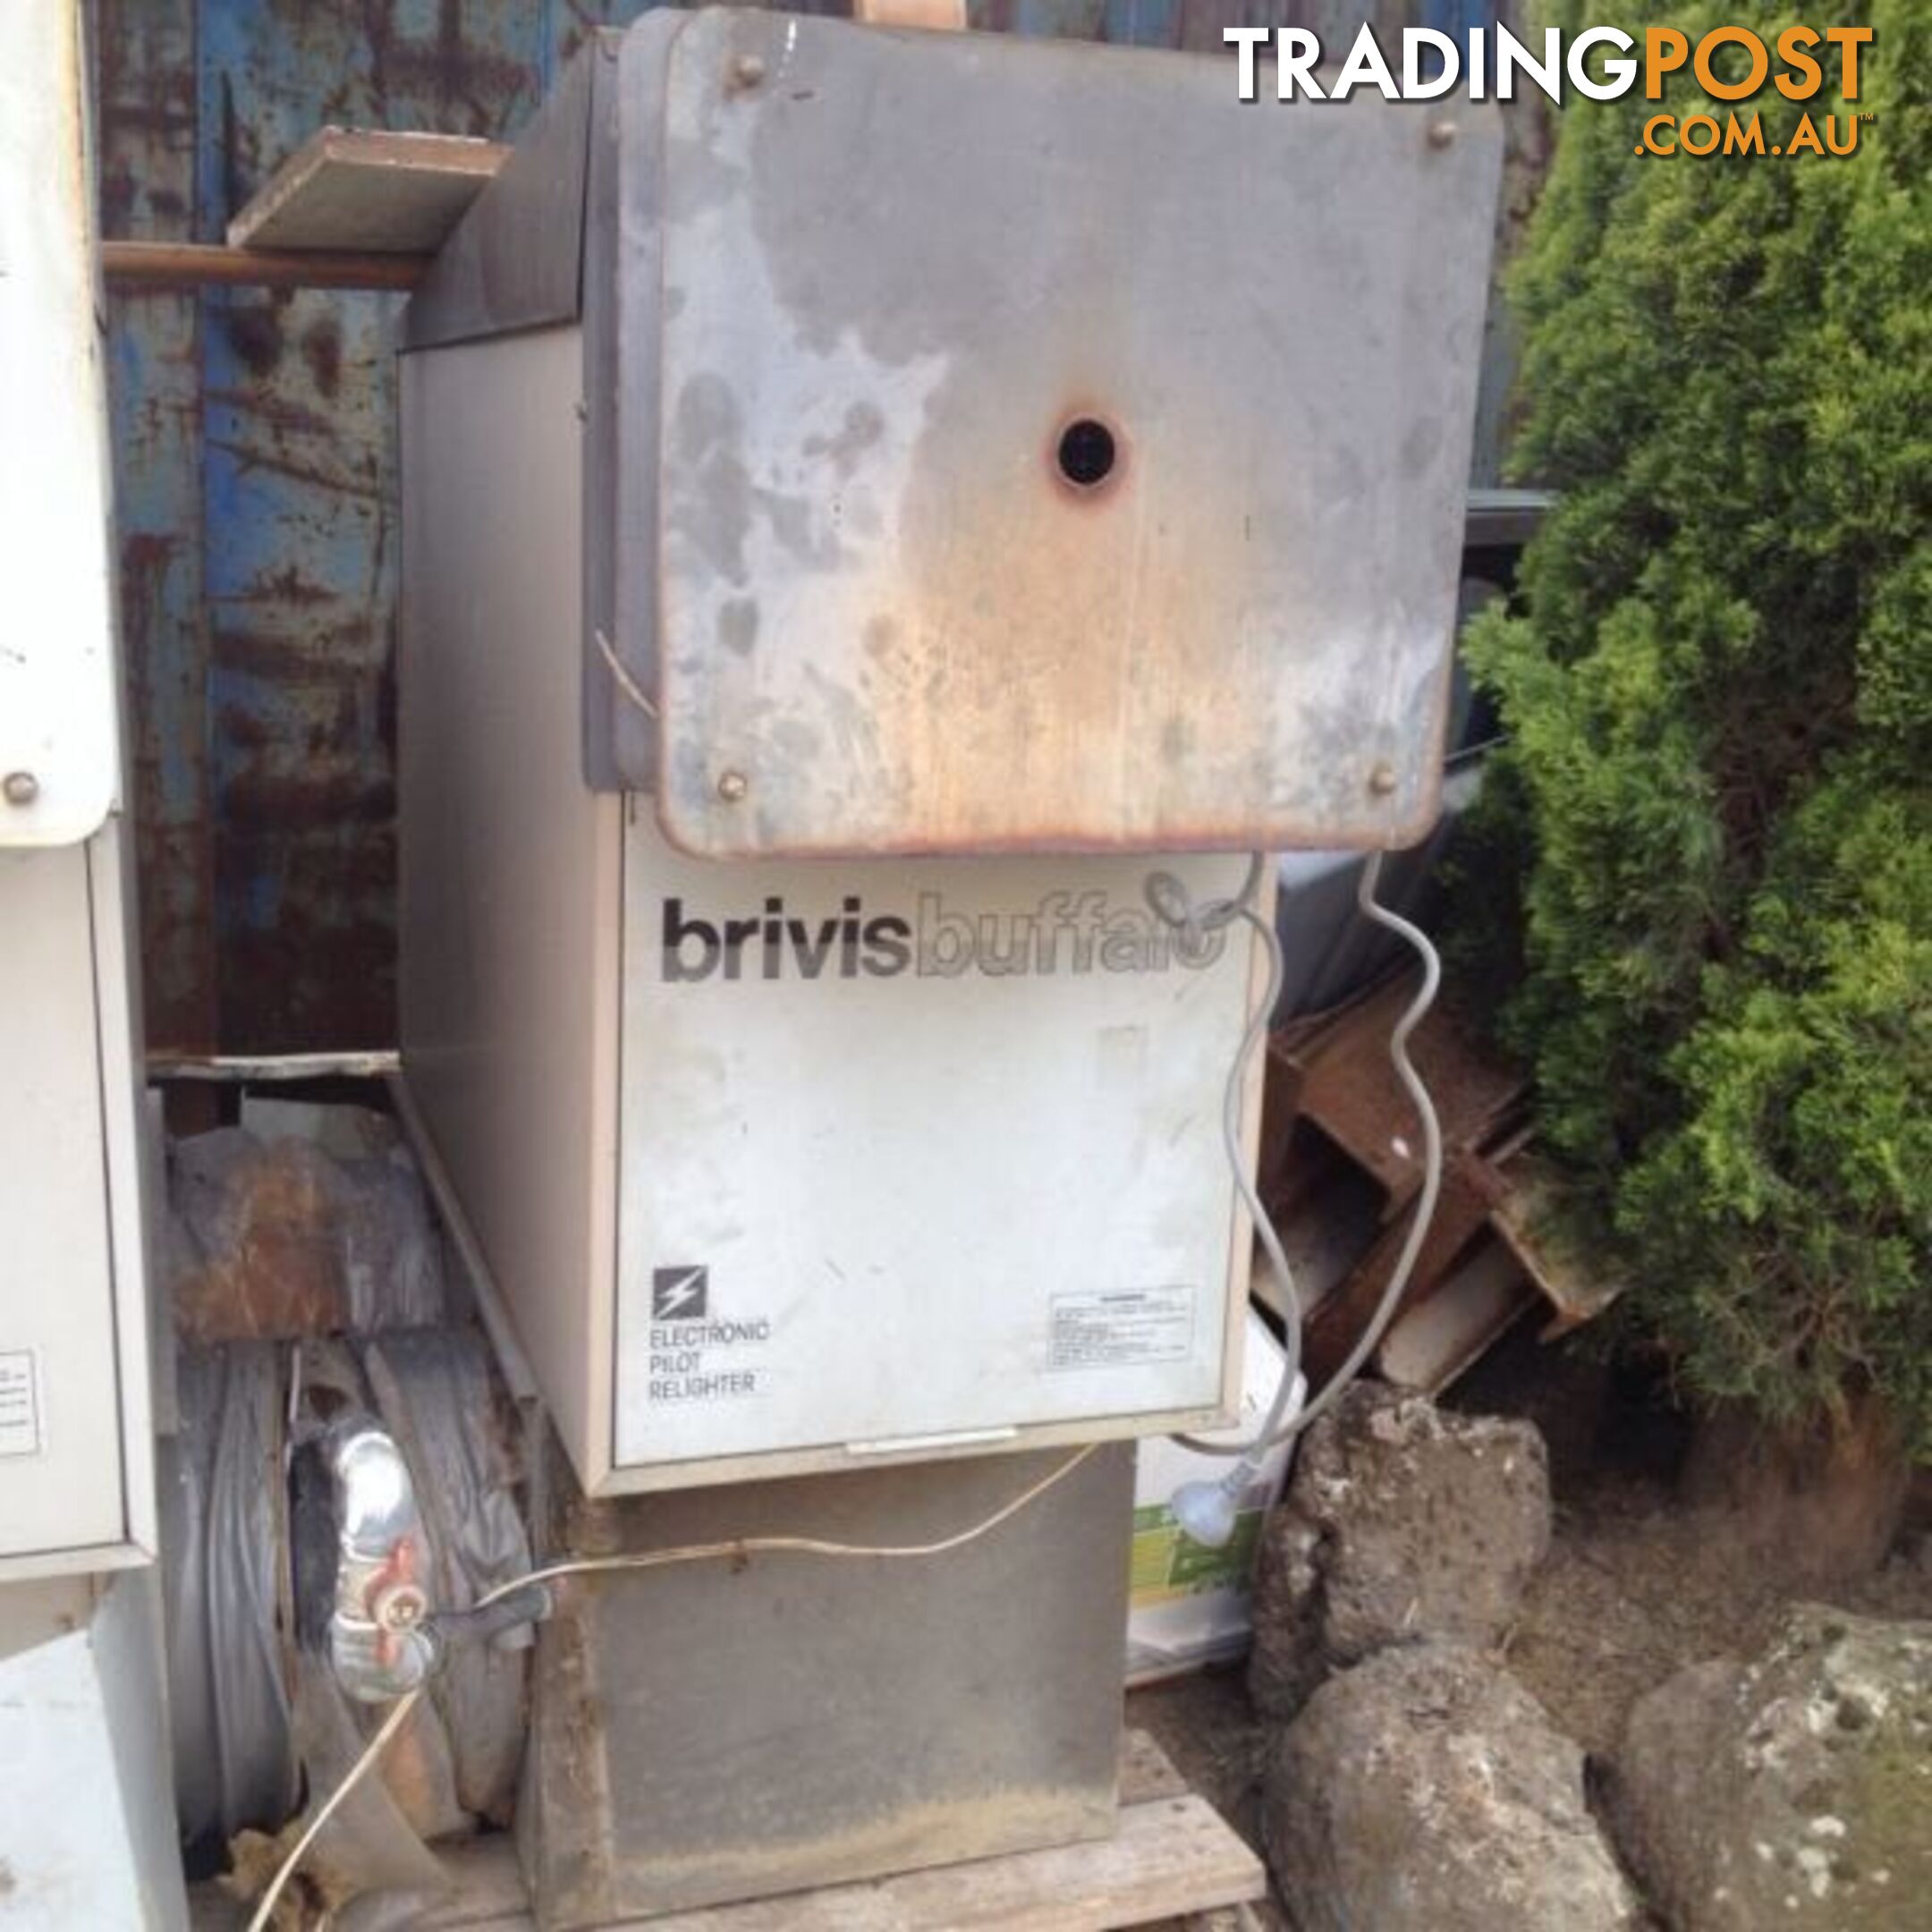 Brivis Buffalo ducted heater unit